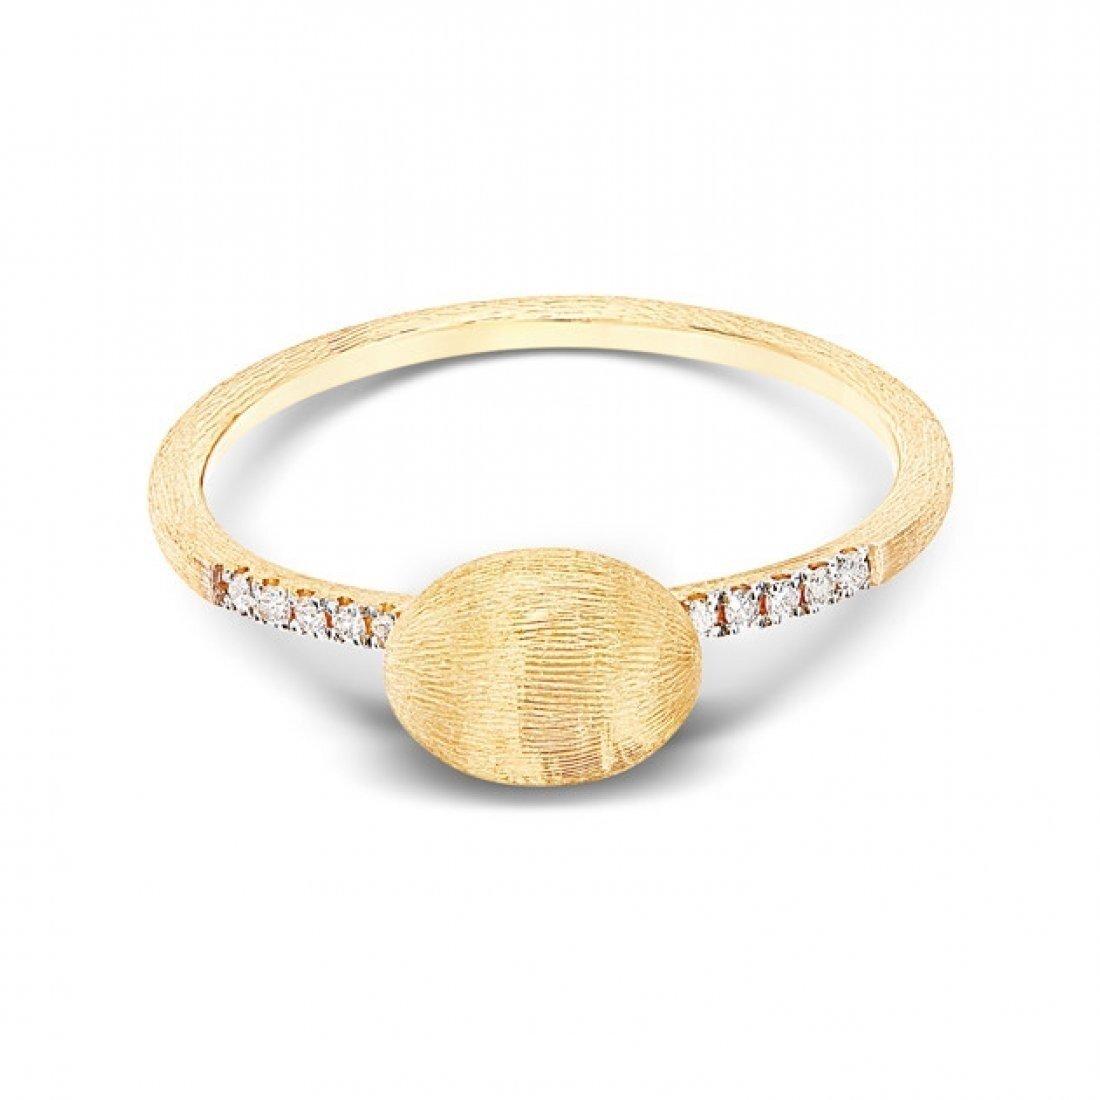 Dancing in the Rain Elite Small Boule East West Diamond Pave Ring in 18kt Yellow Gold